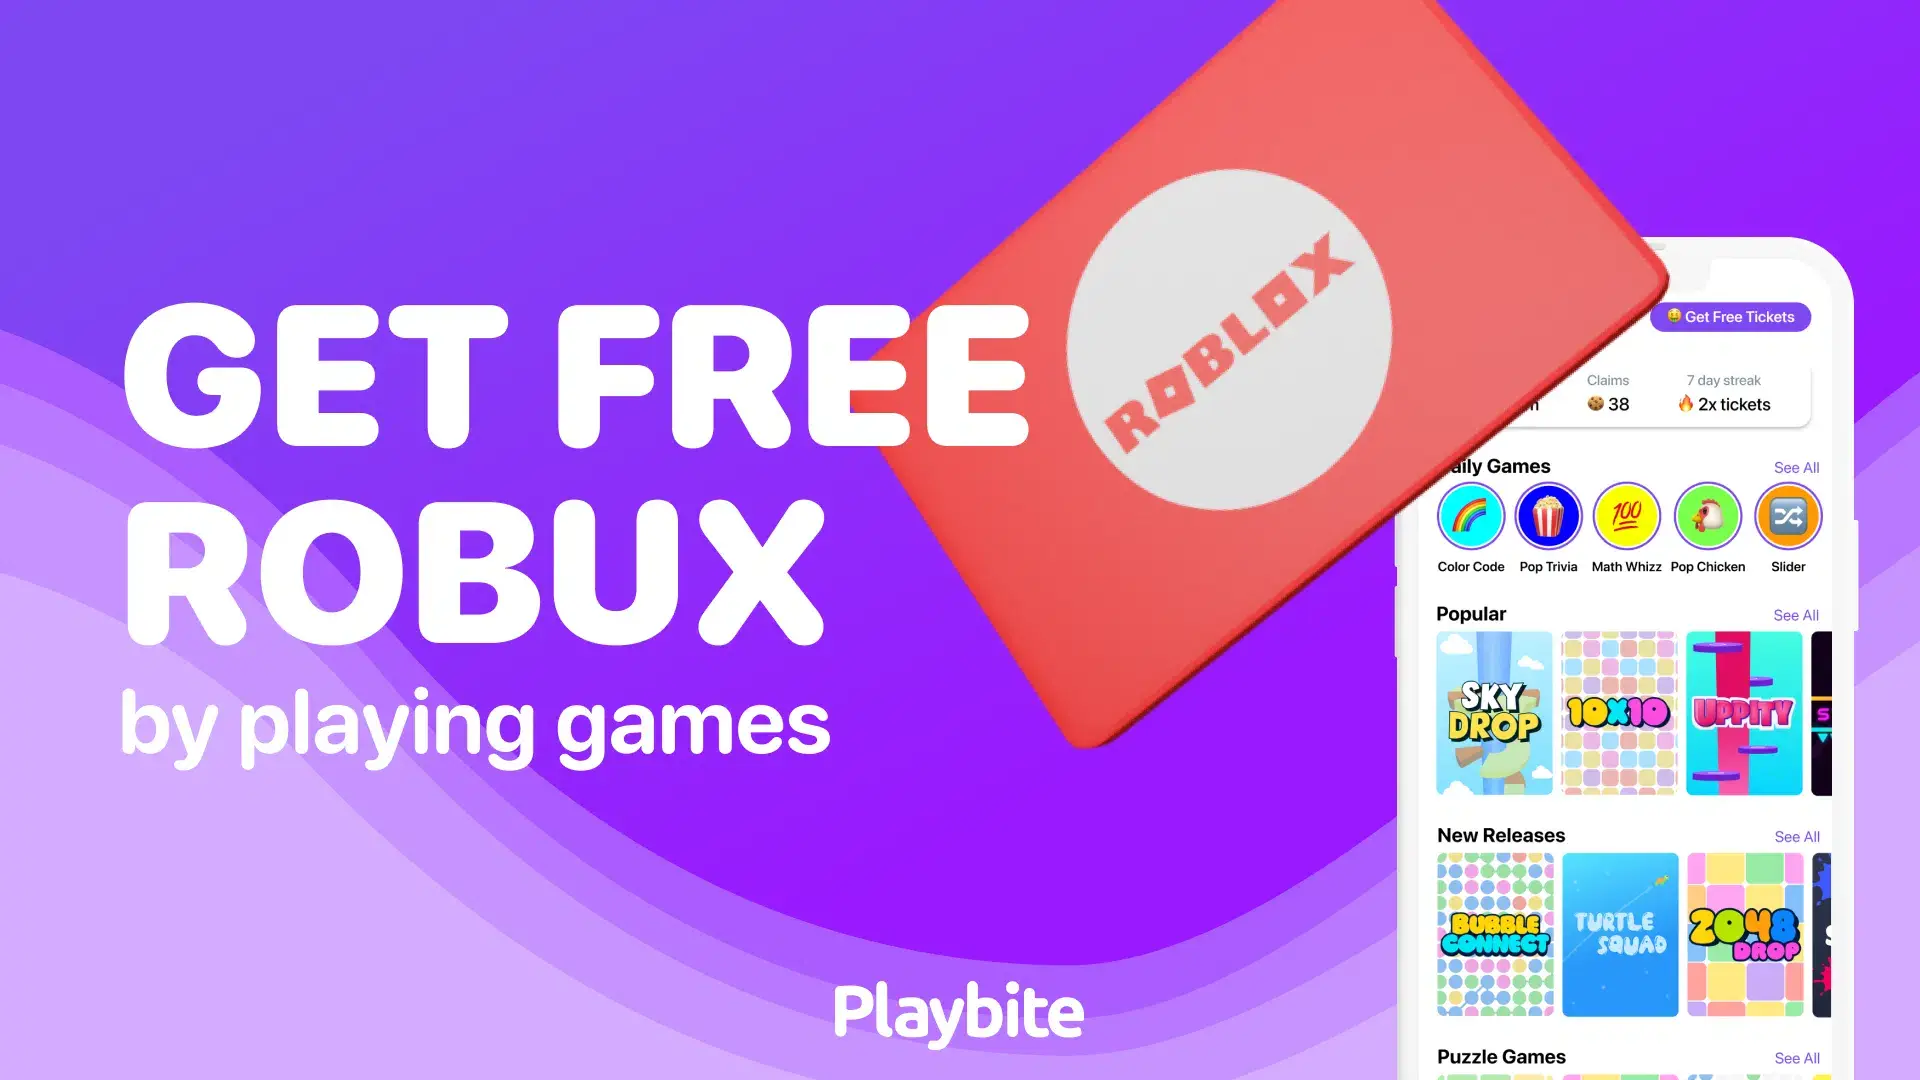 Robux Scratch Frenzy – Apps no Google Play